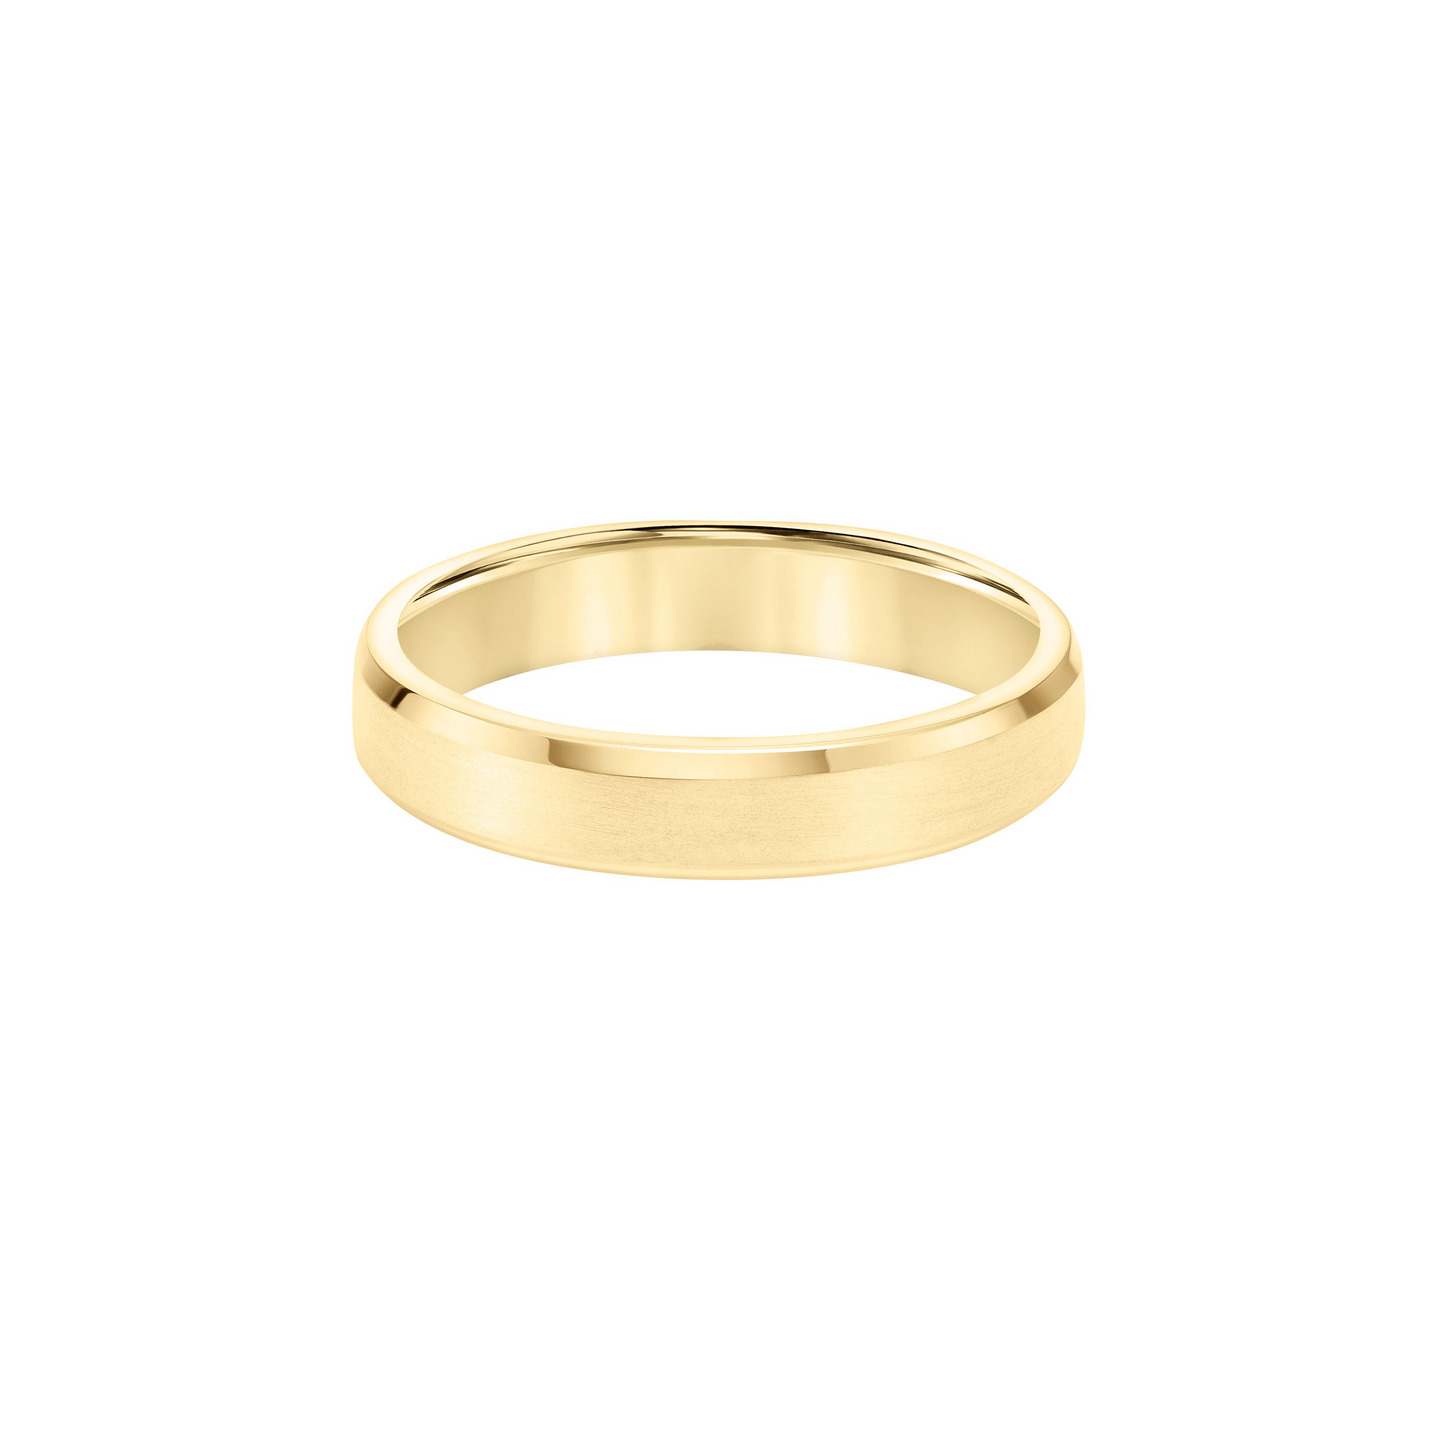 Fink's 14K Yellow Gold Brushed Center with Beveled Edges